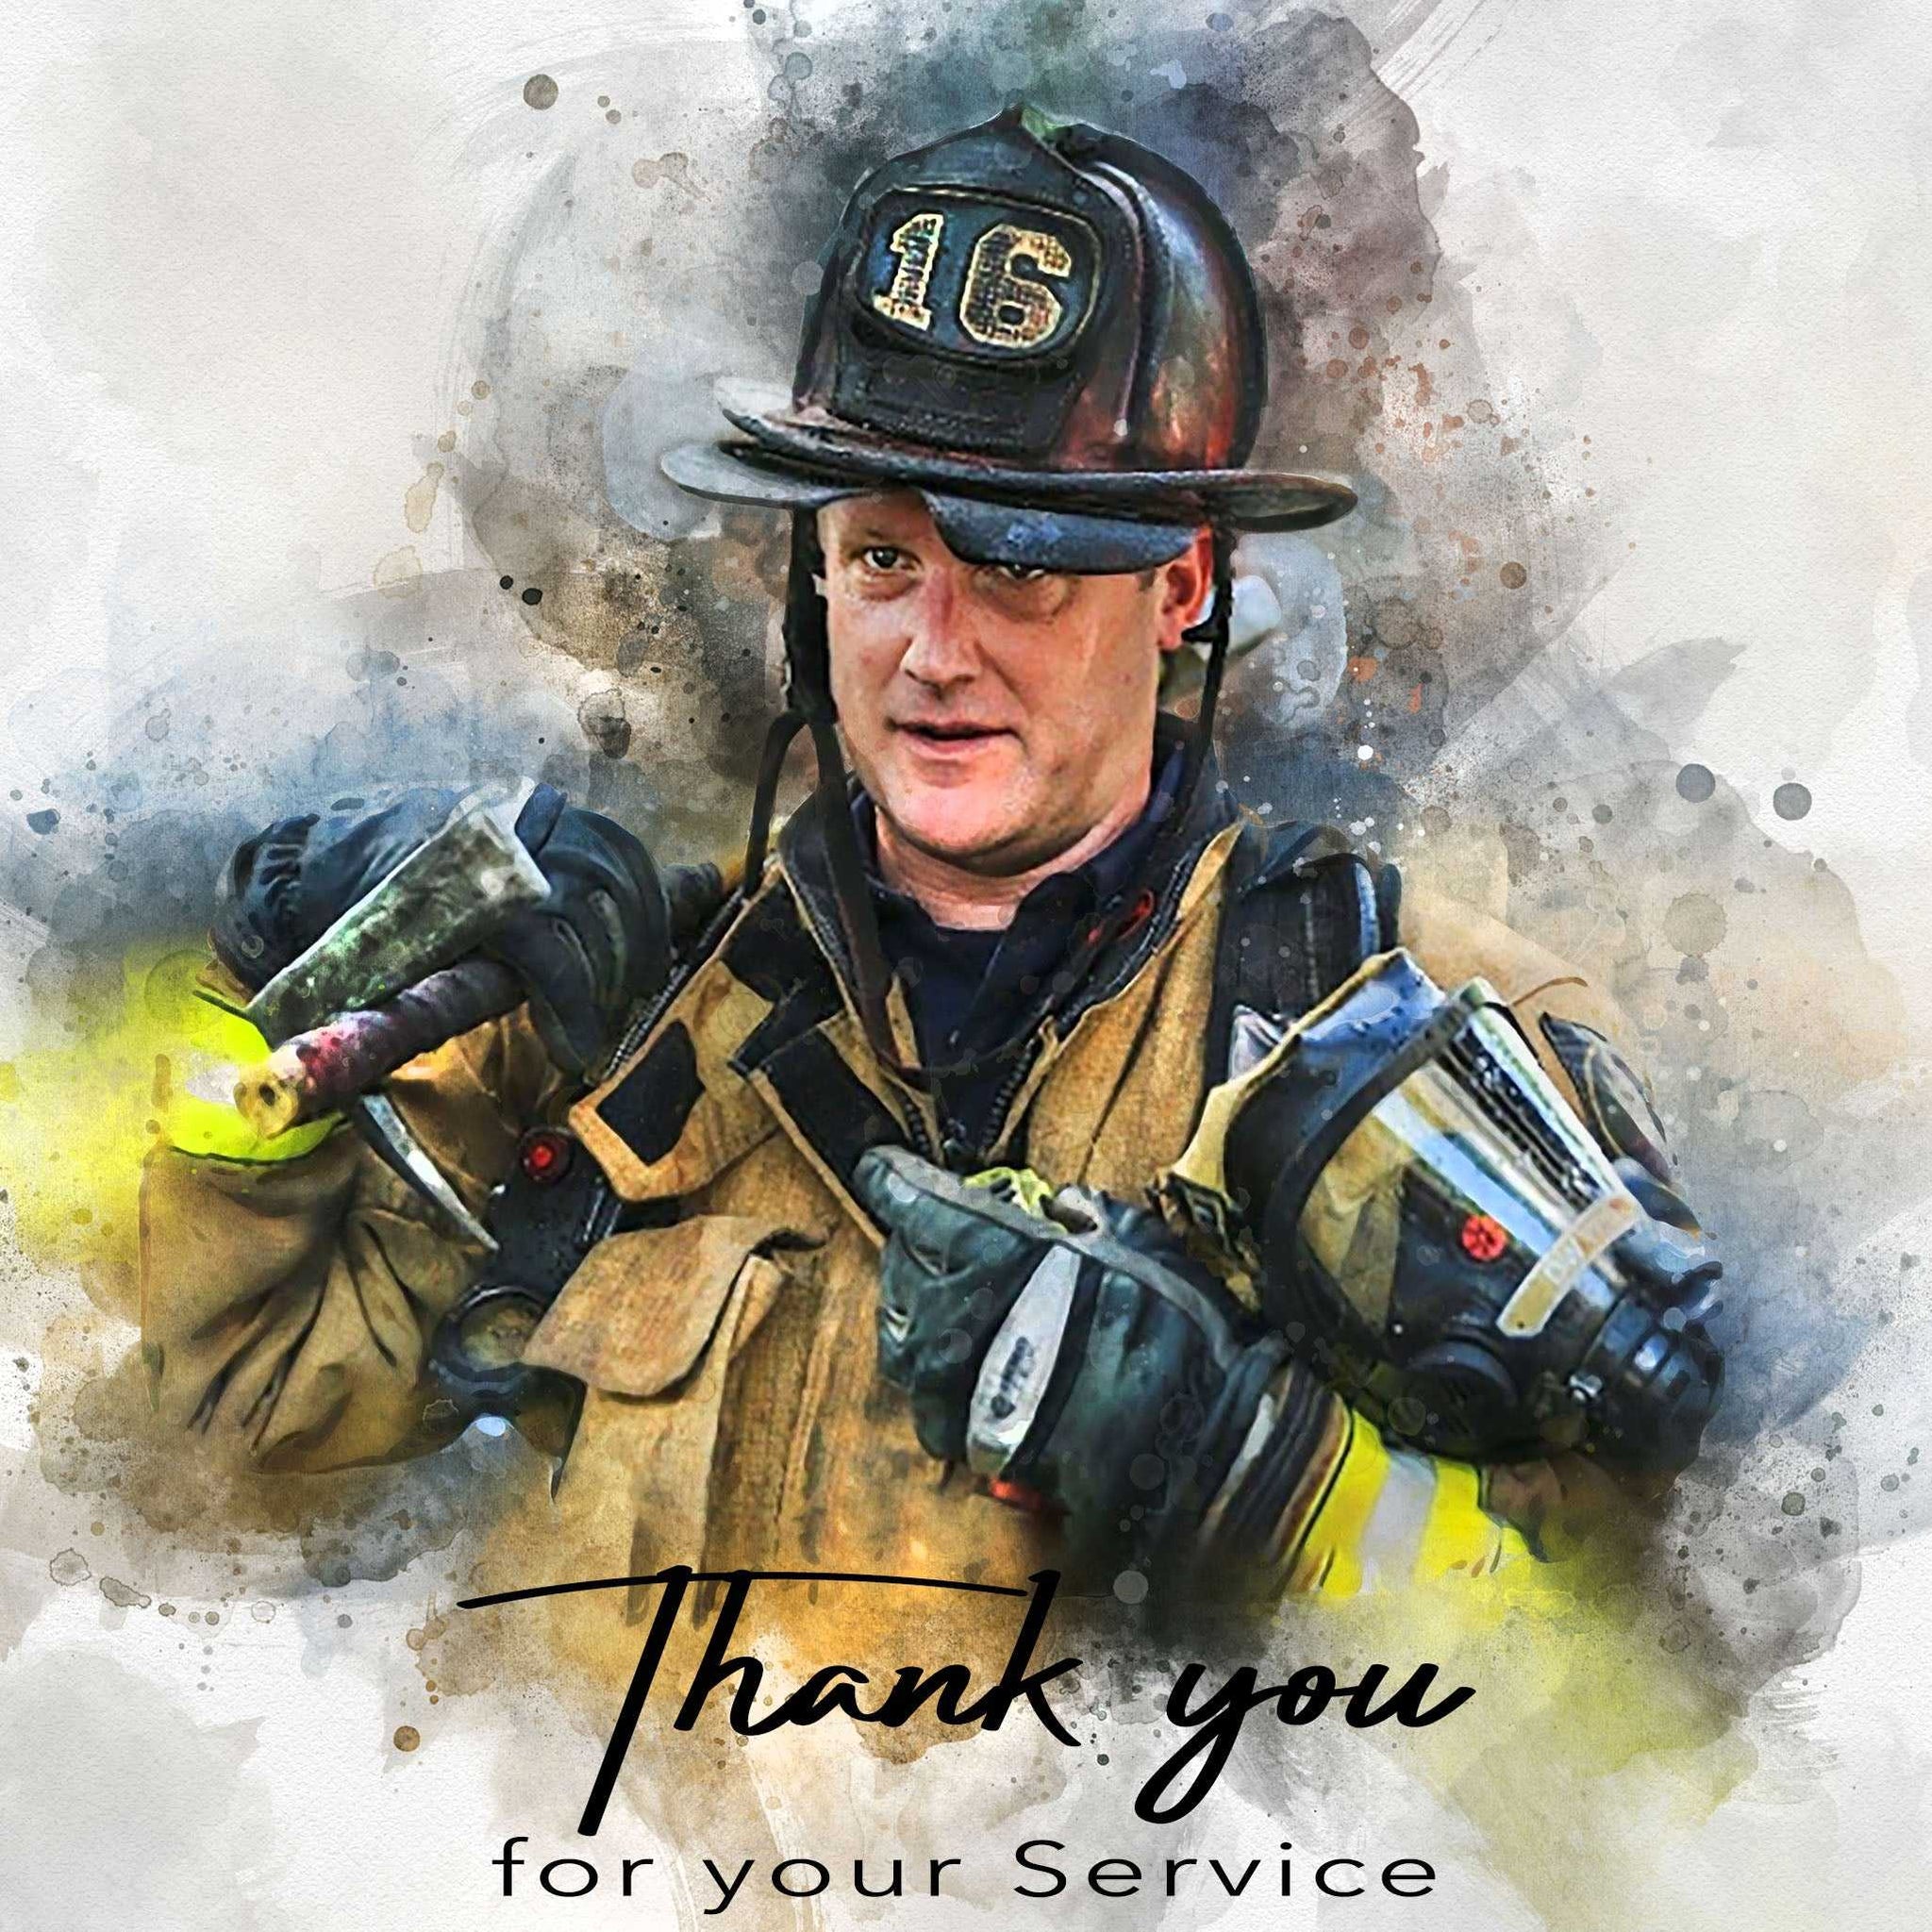 Fireman Gifts 👩‍🚒🔥 Fire Department Gifts | Firefighter Retirement Gifts | Firefighter Presents Ideas | Firefighter Gifts - FromPicToArt